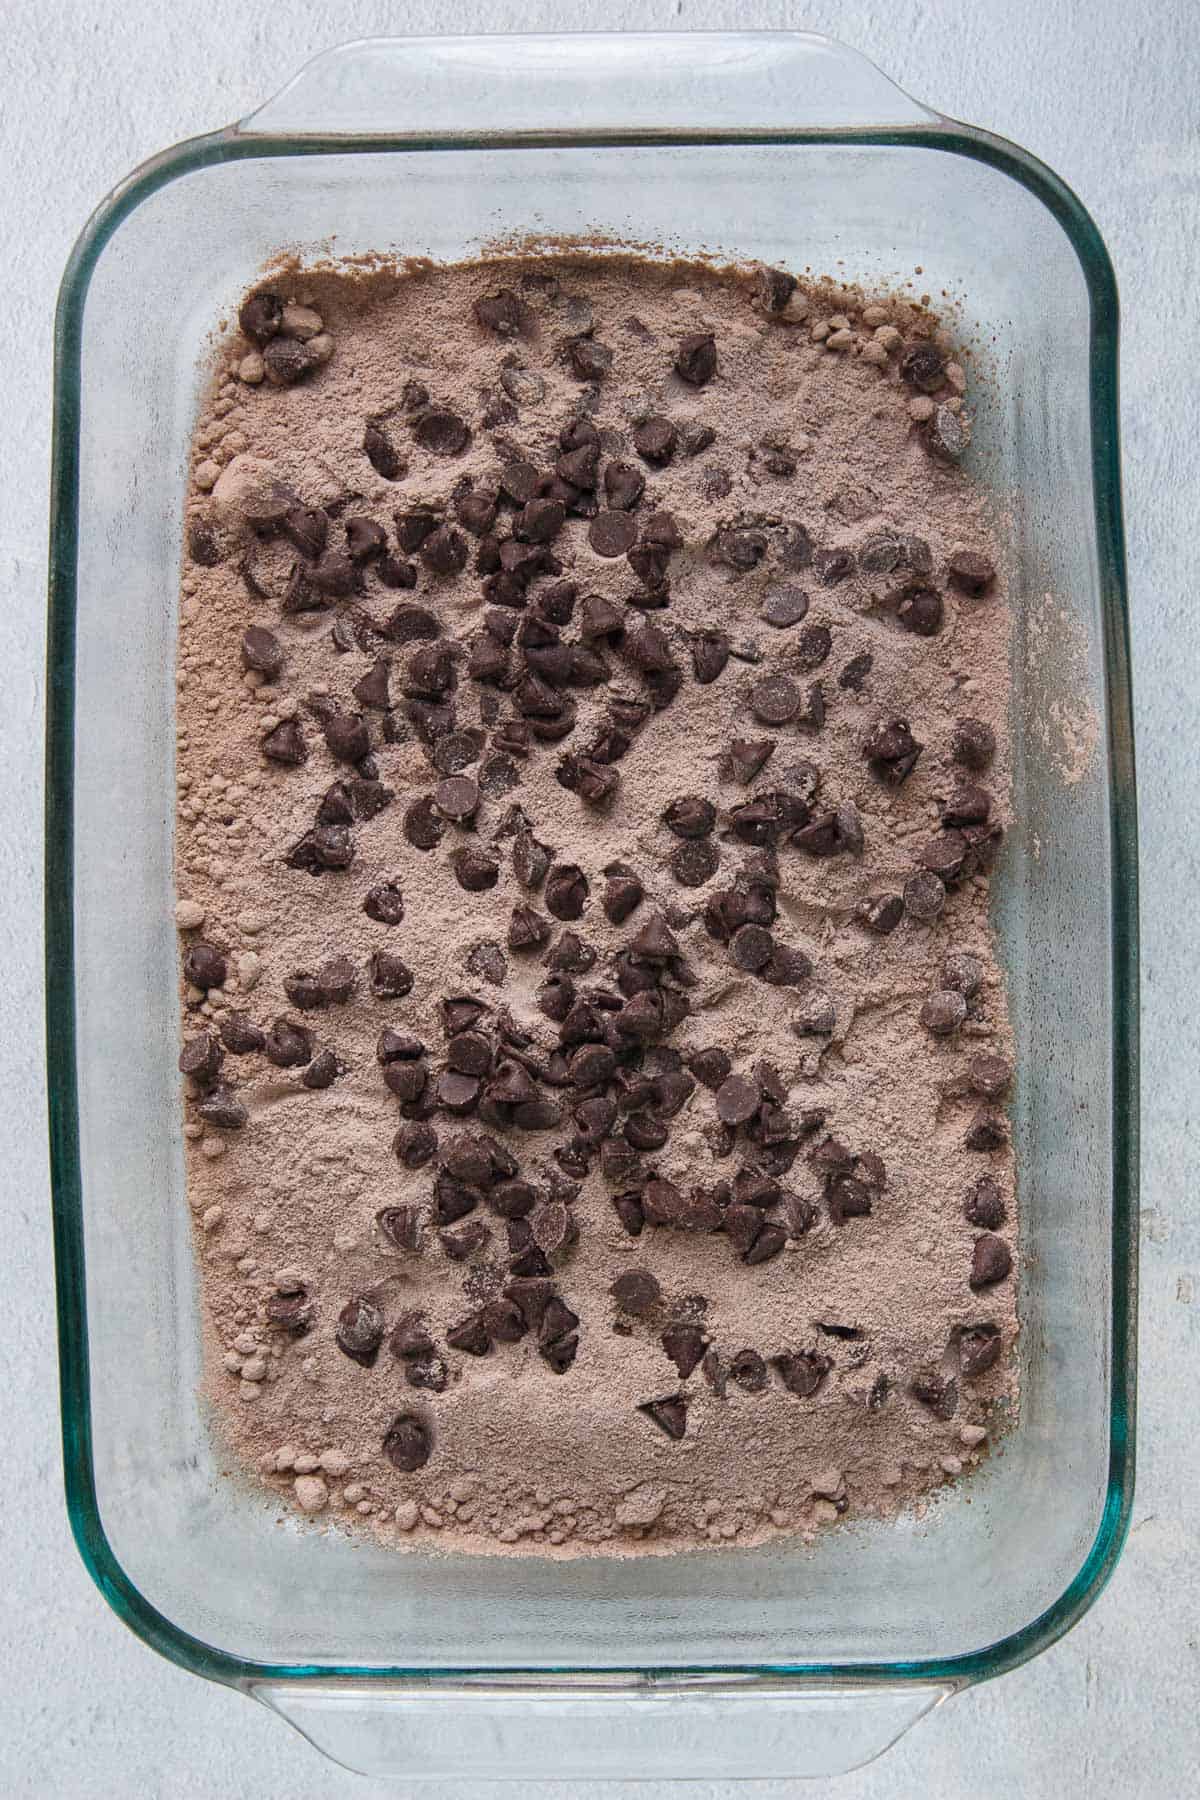 Chocolate chips layered over boxed cake mix and instant pudding mix